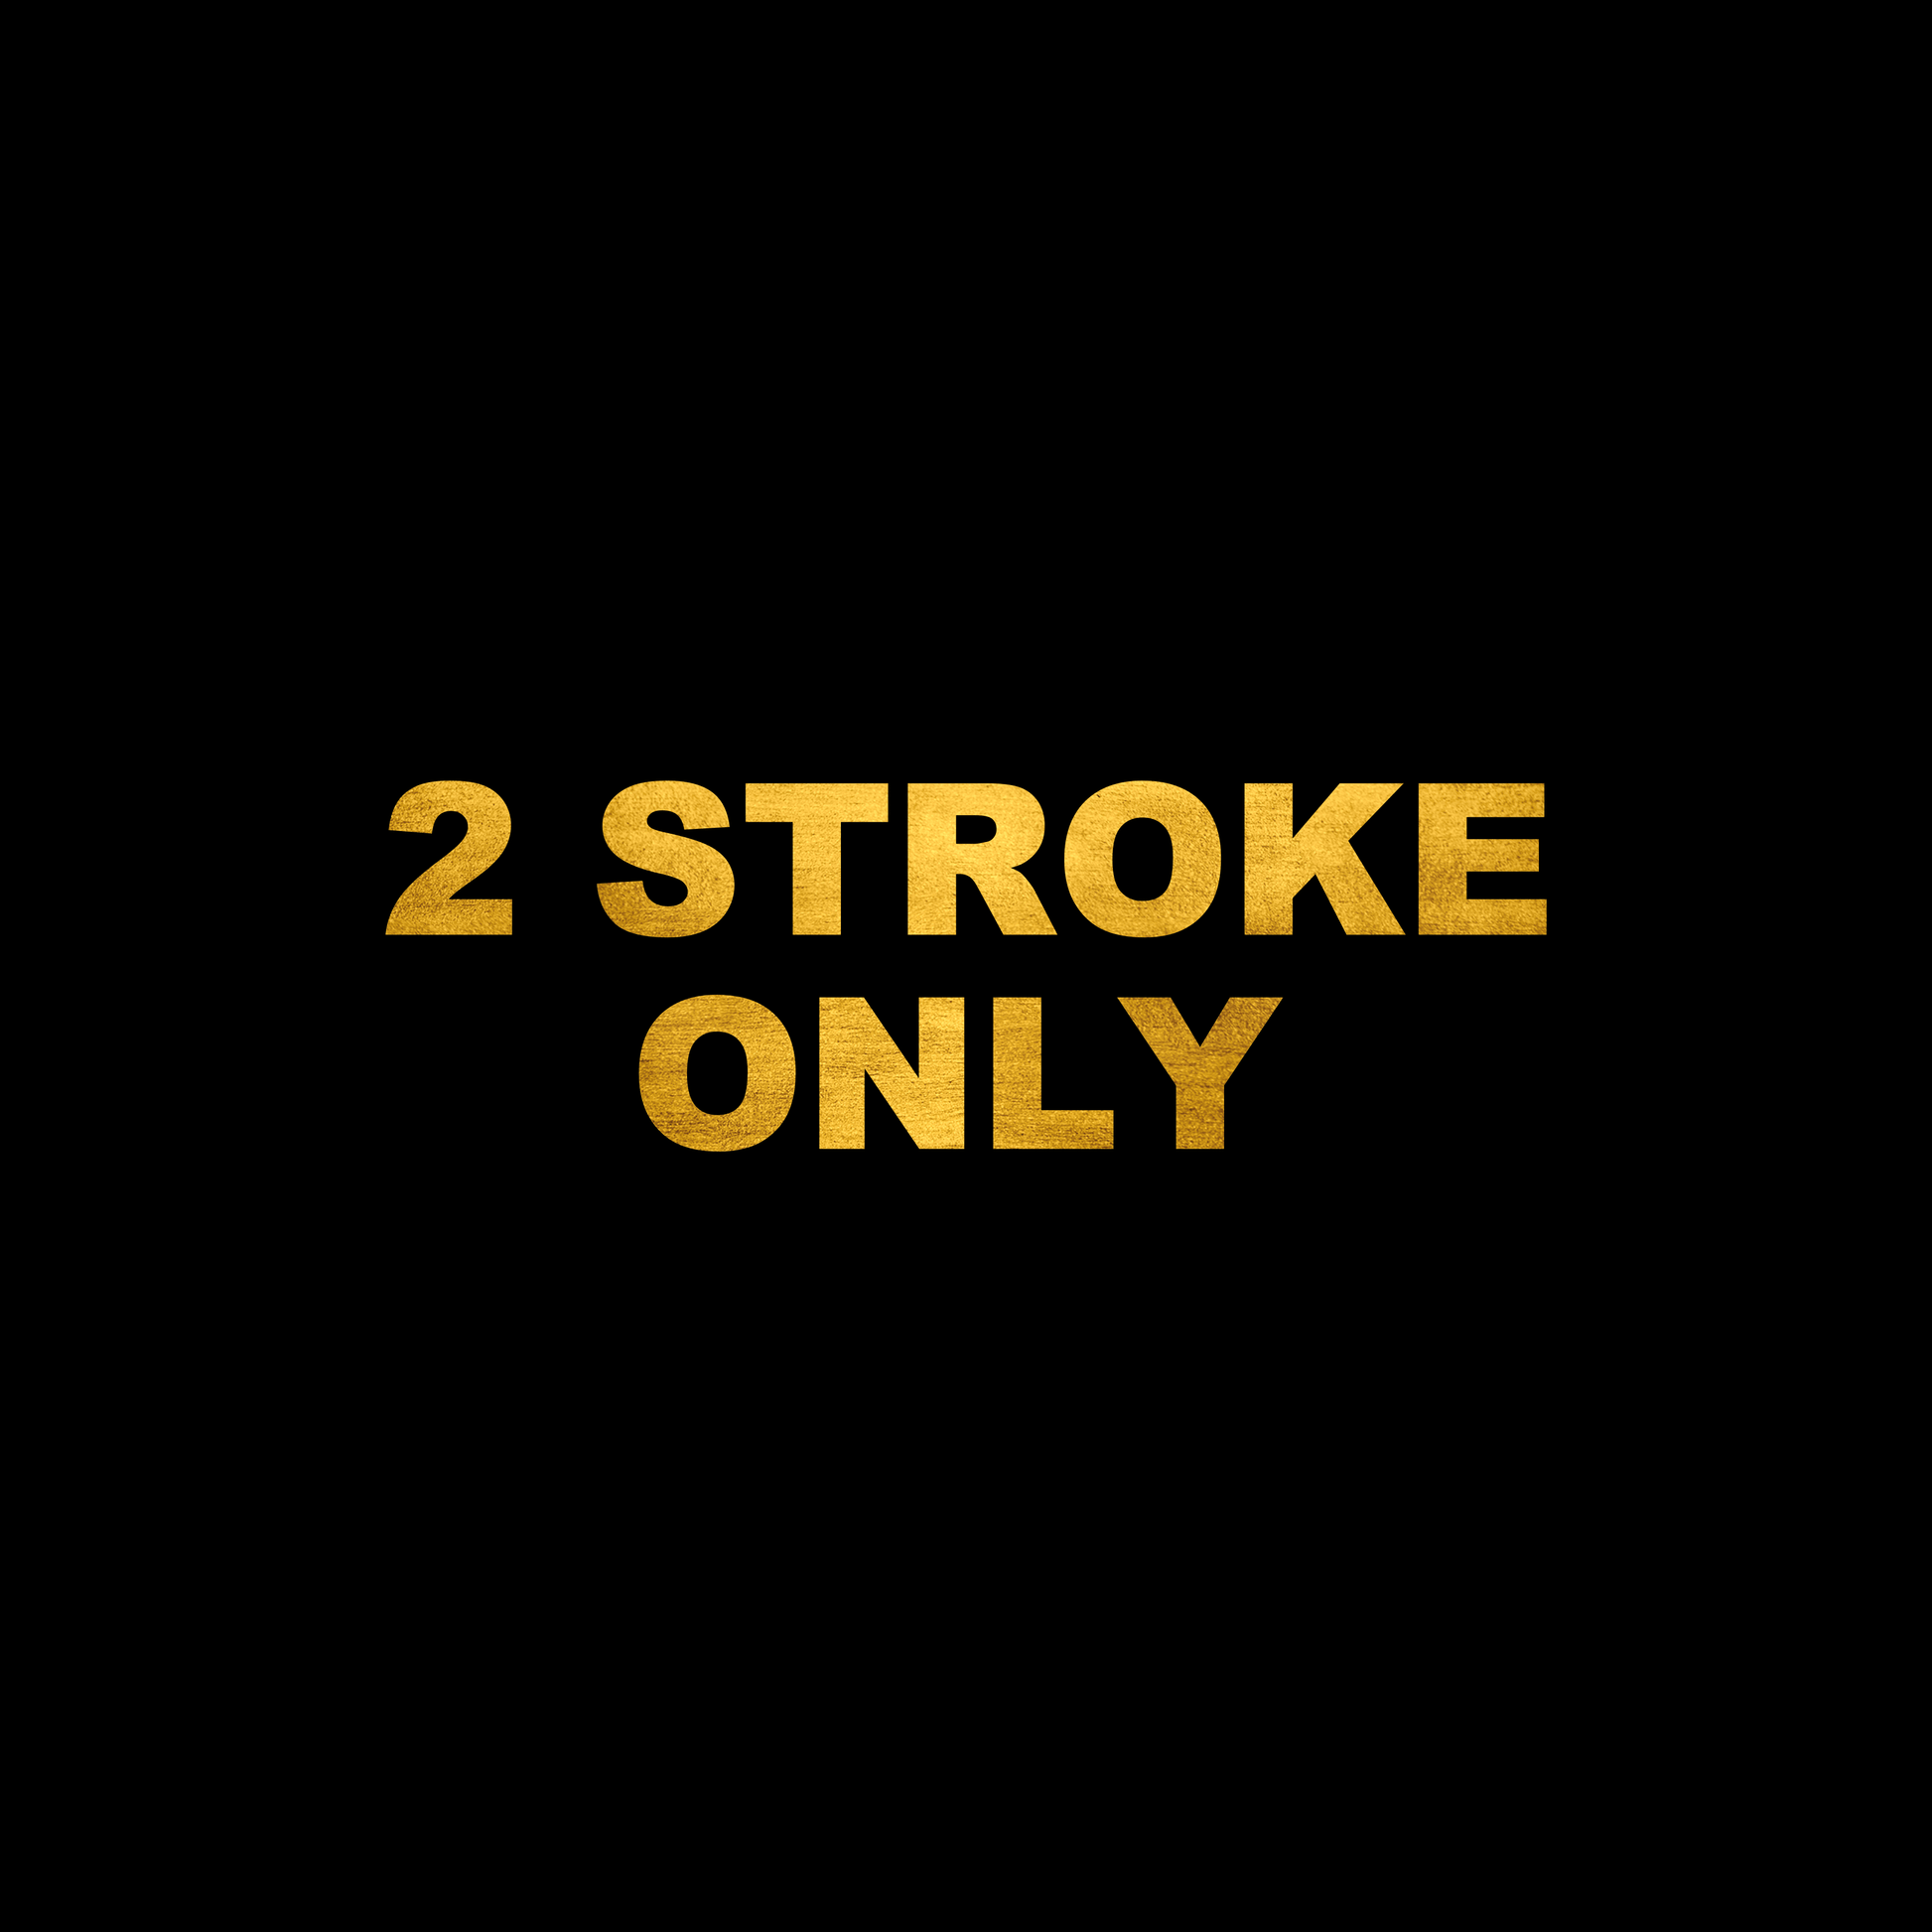 2 Stroke only sticker decal